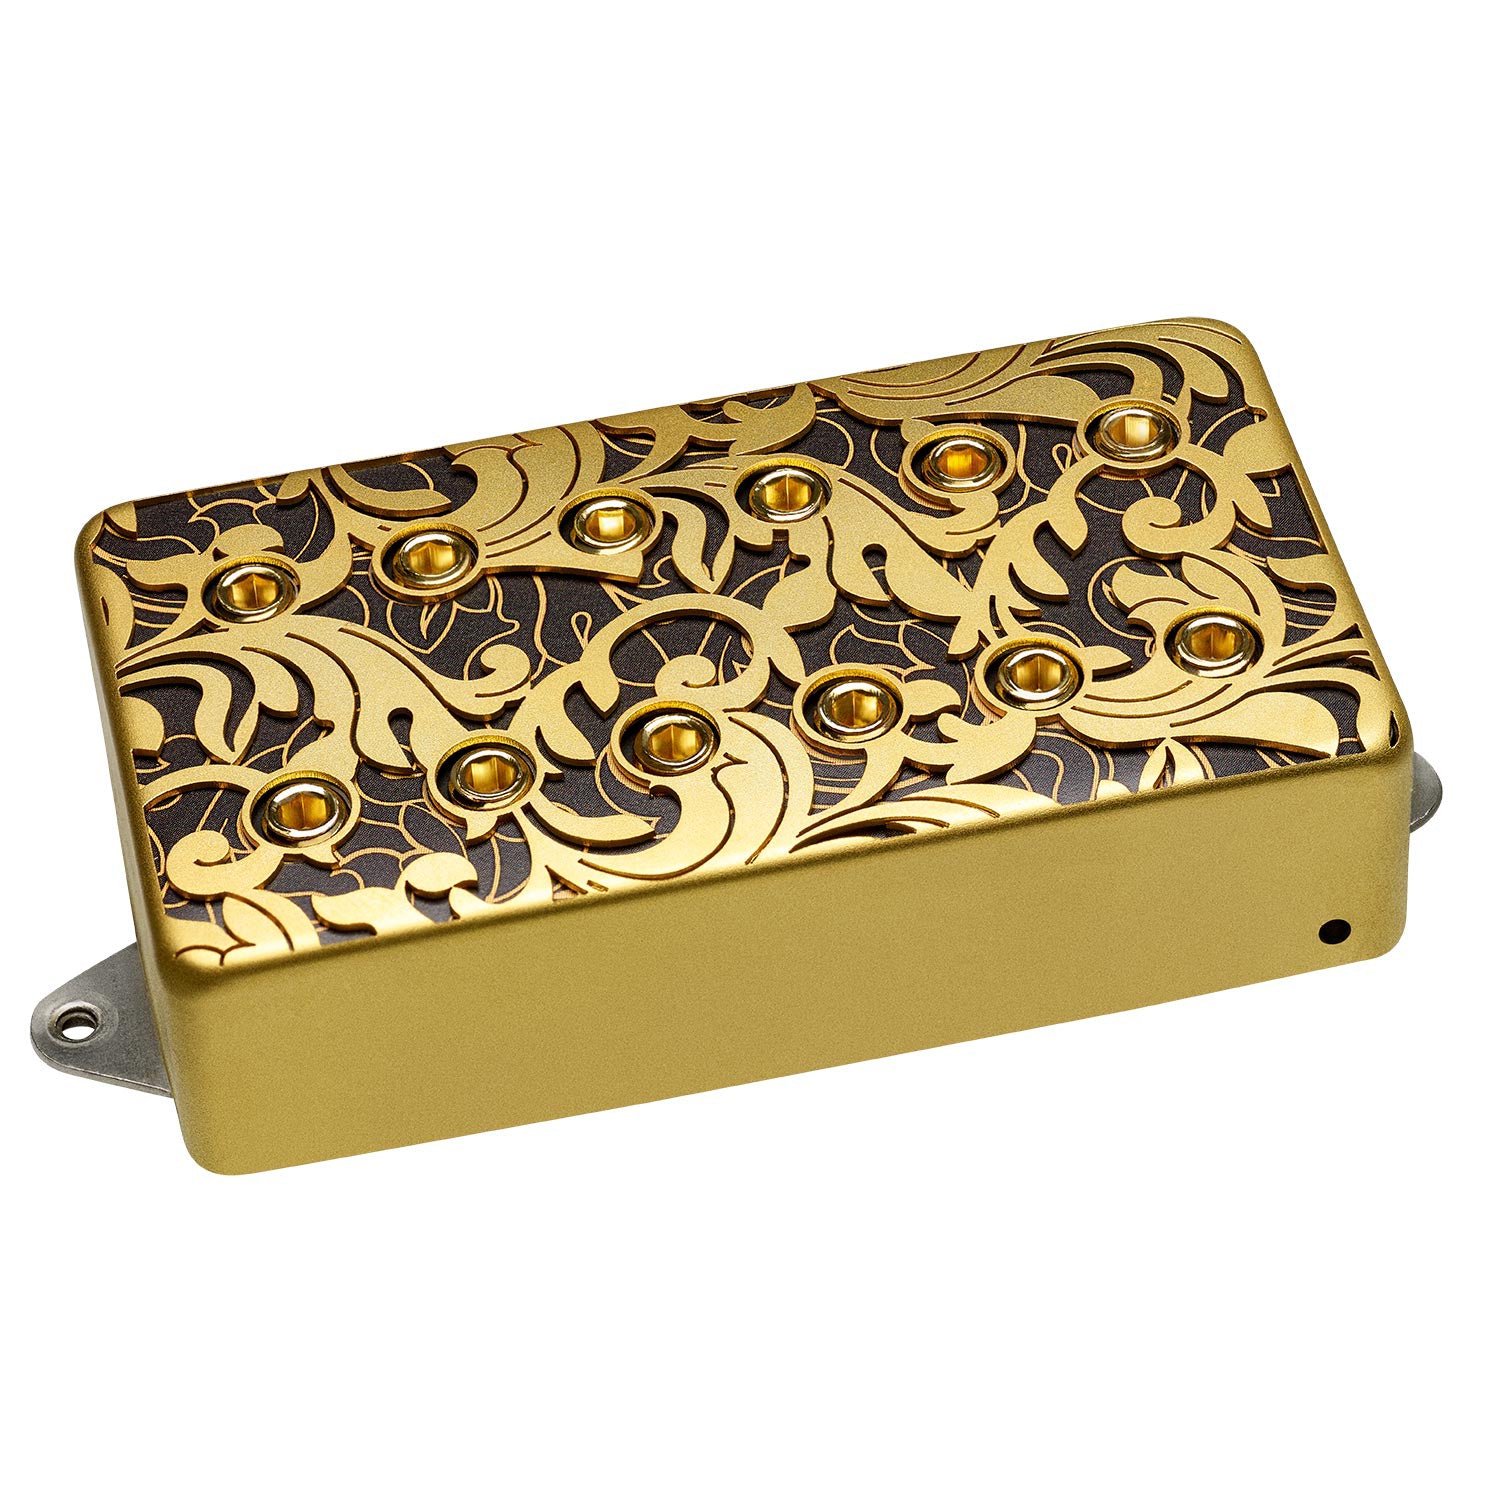 image of a gold and black guitar pickup against white background. the top of the pickup has a black and gold leafy pattern design on it, and the rest of the pickup is gold.